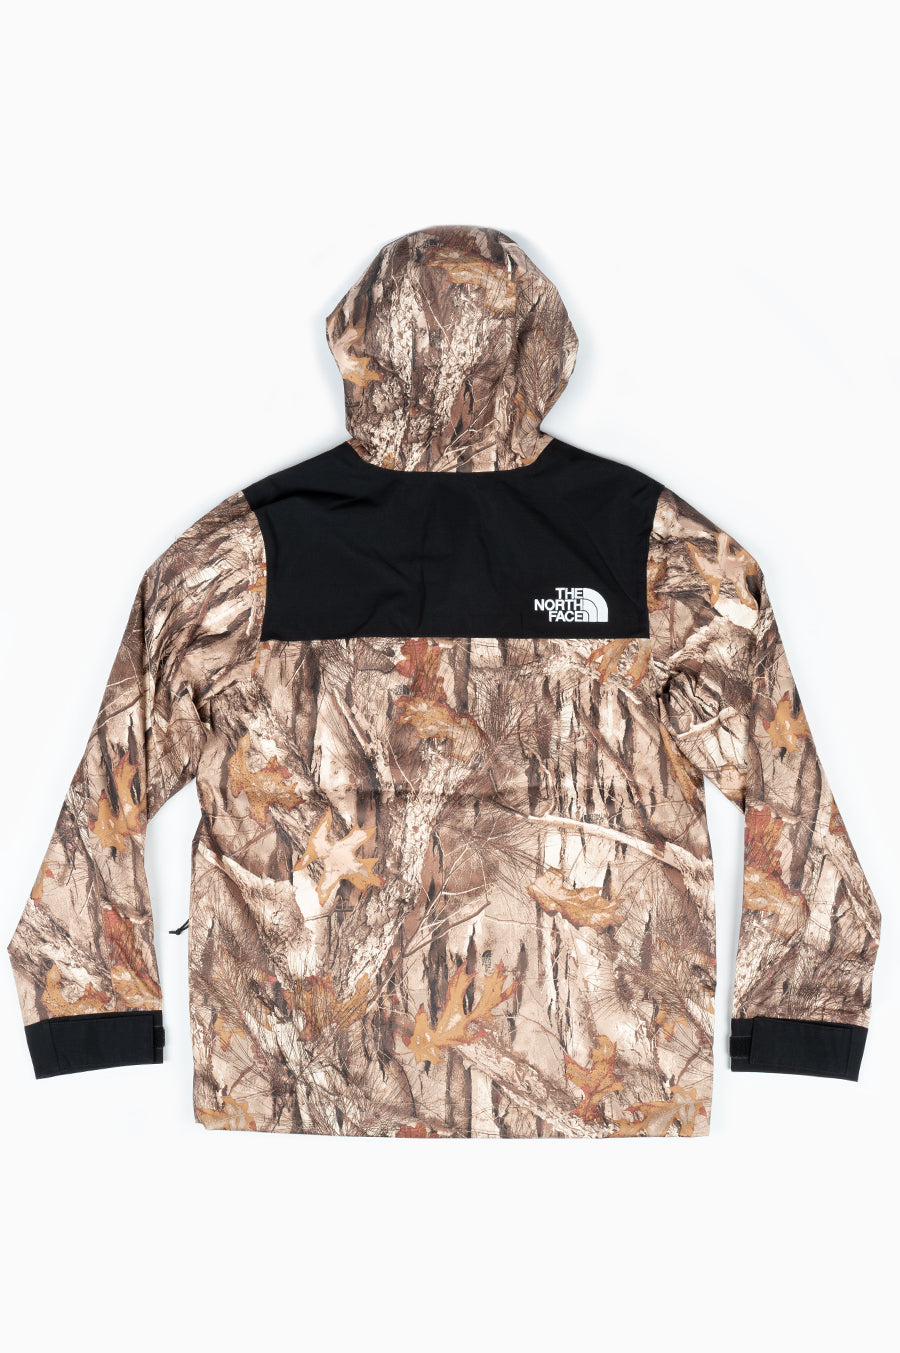 THE NORTH FACE CYPRESS JACKET KELP TAN FOREST FLOOR